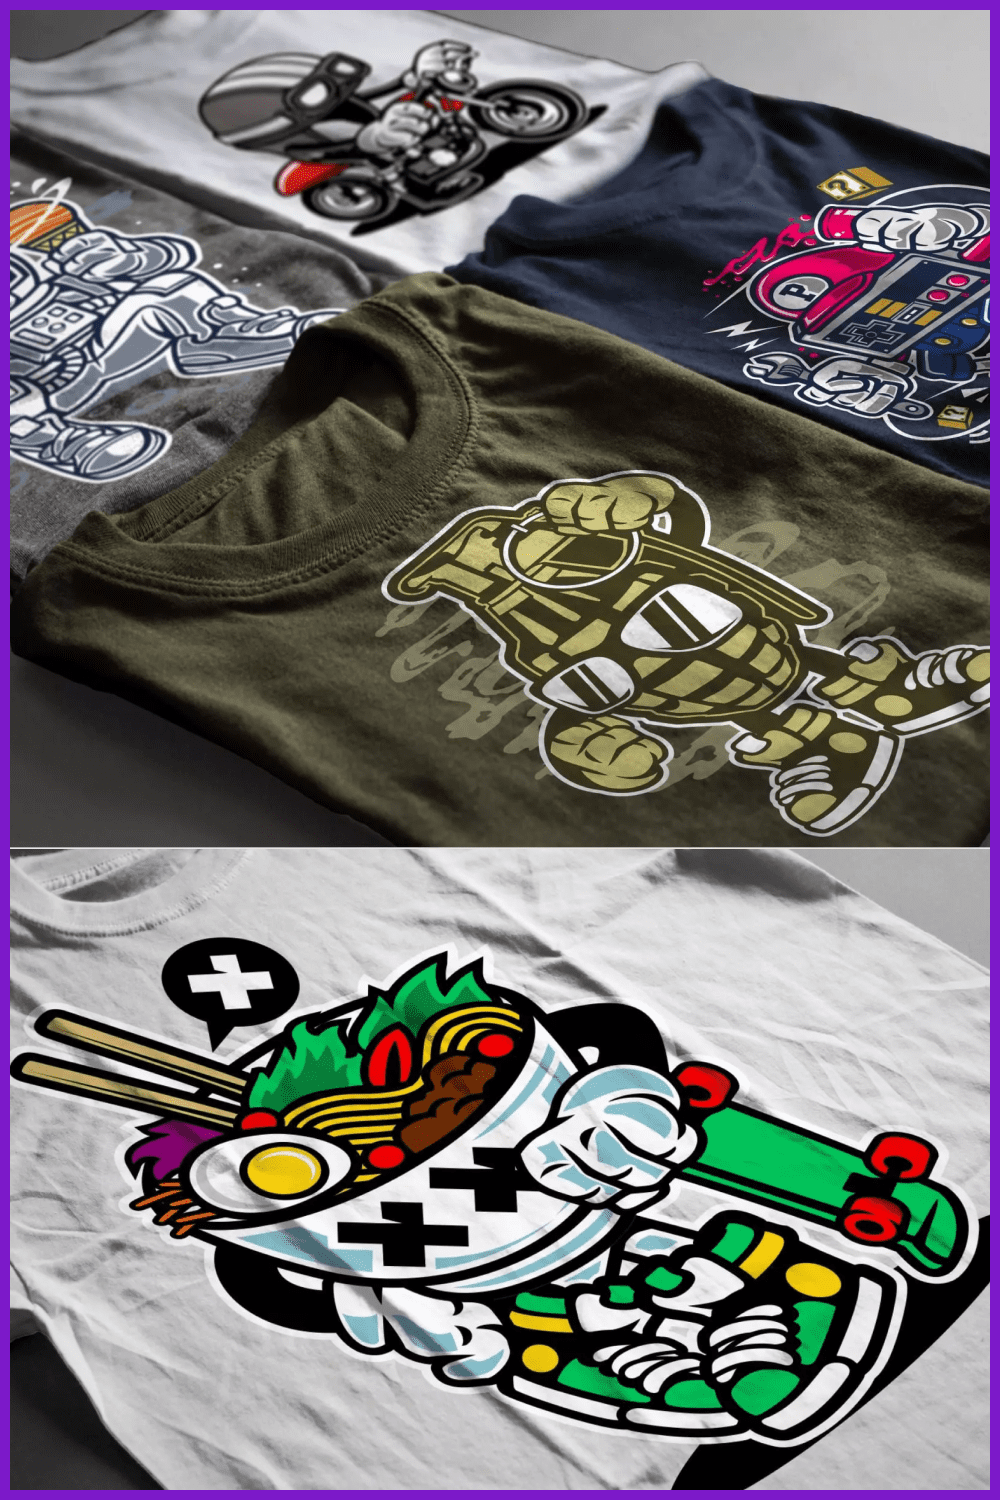 Collage of T-shirt images with bright cartoon characters.